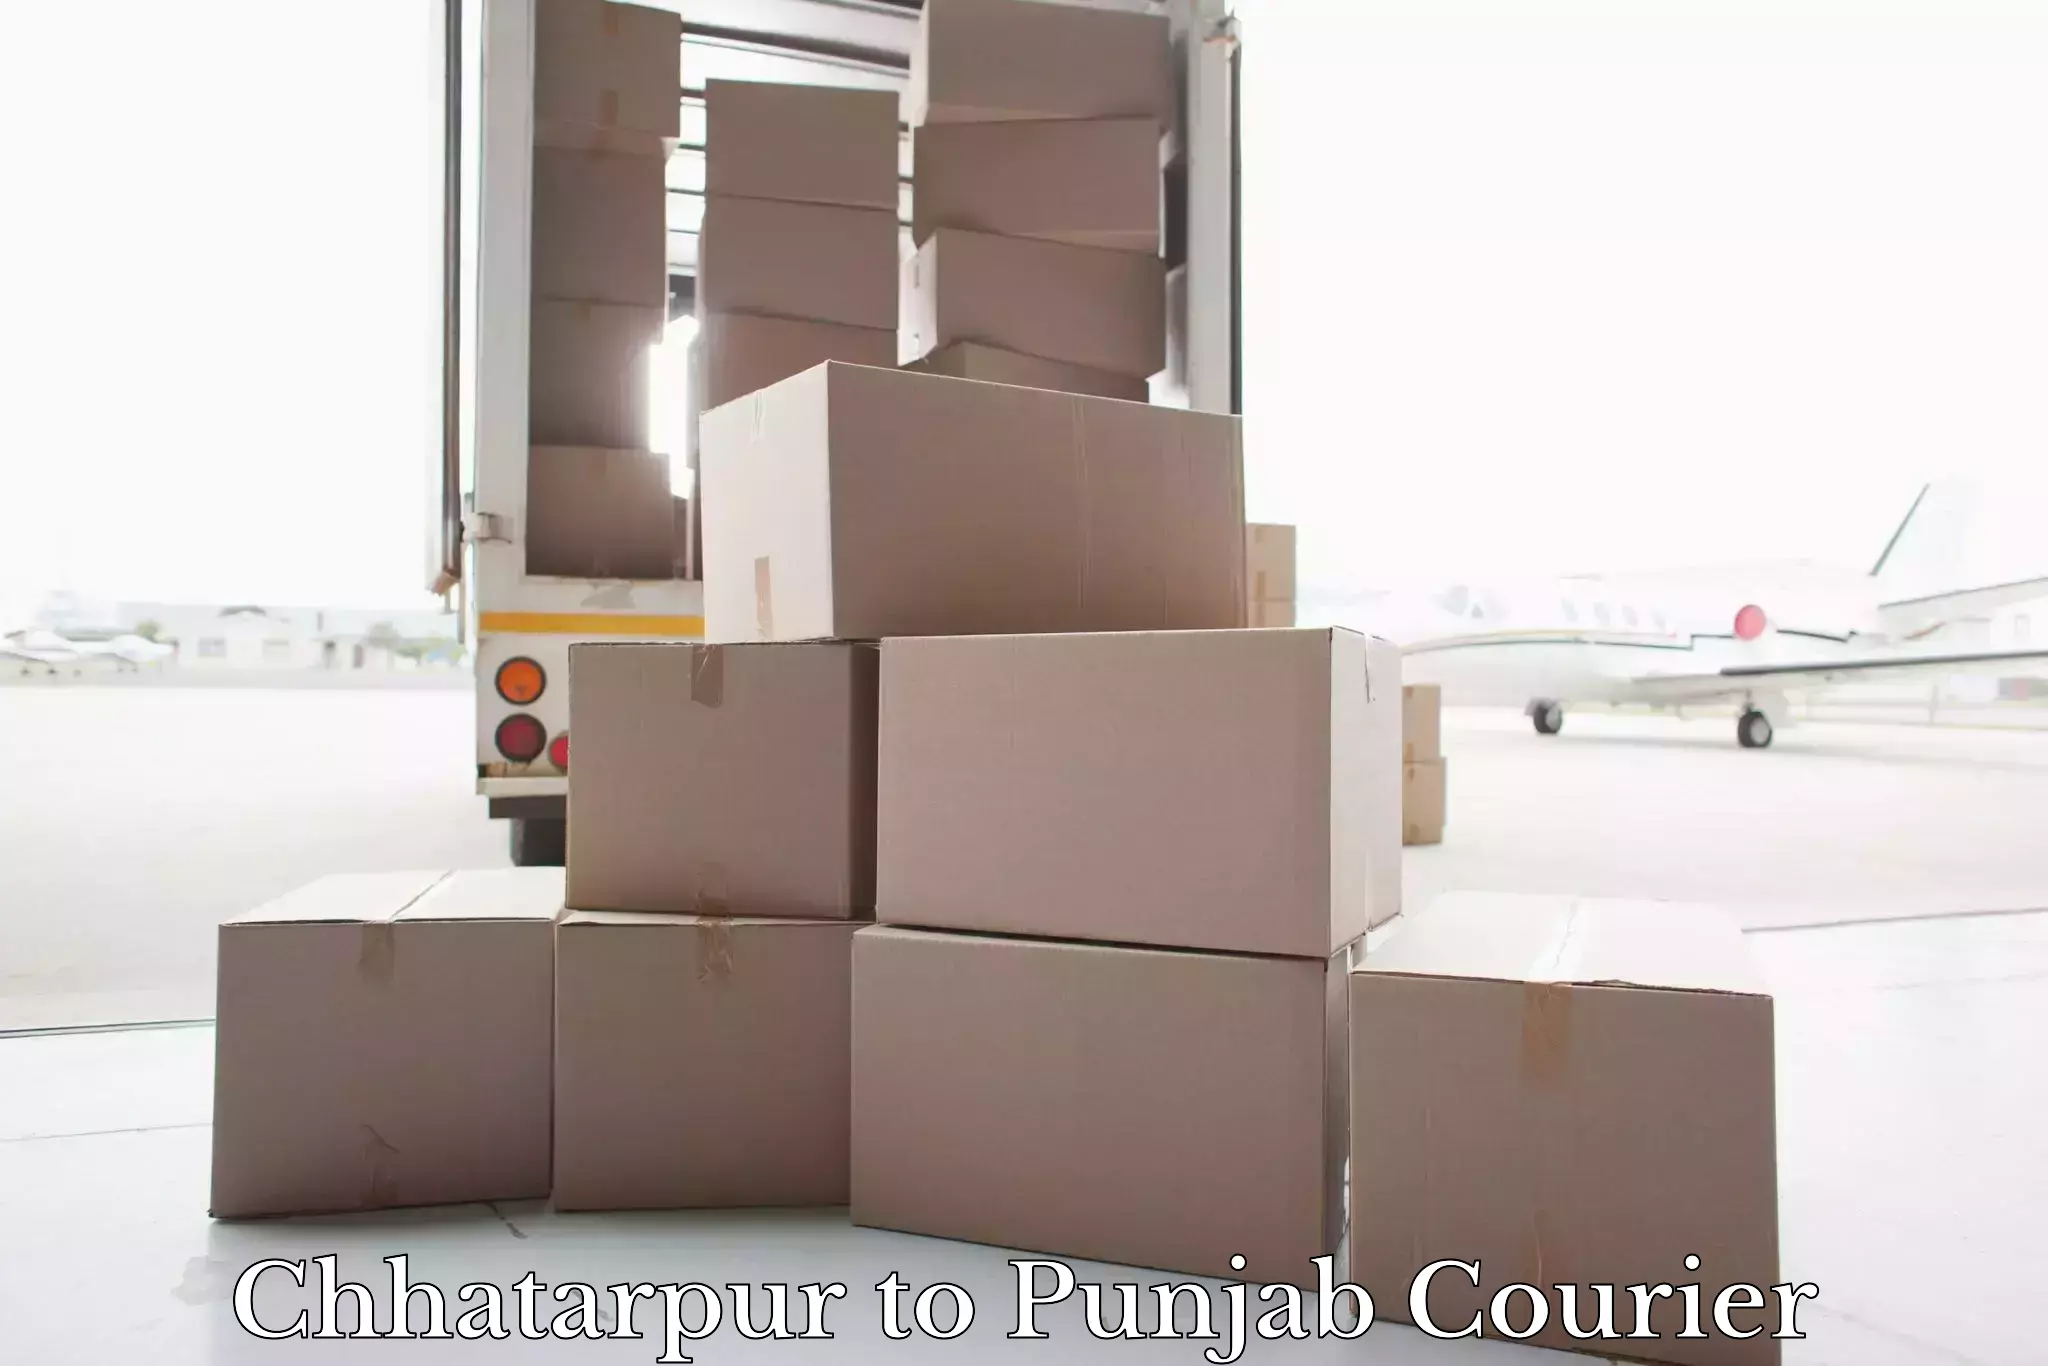 Baggage delivery optimization in Chhatarpur to Dharamkot